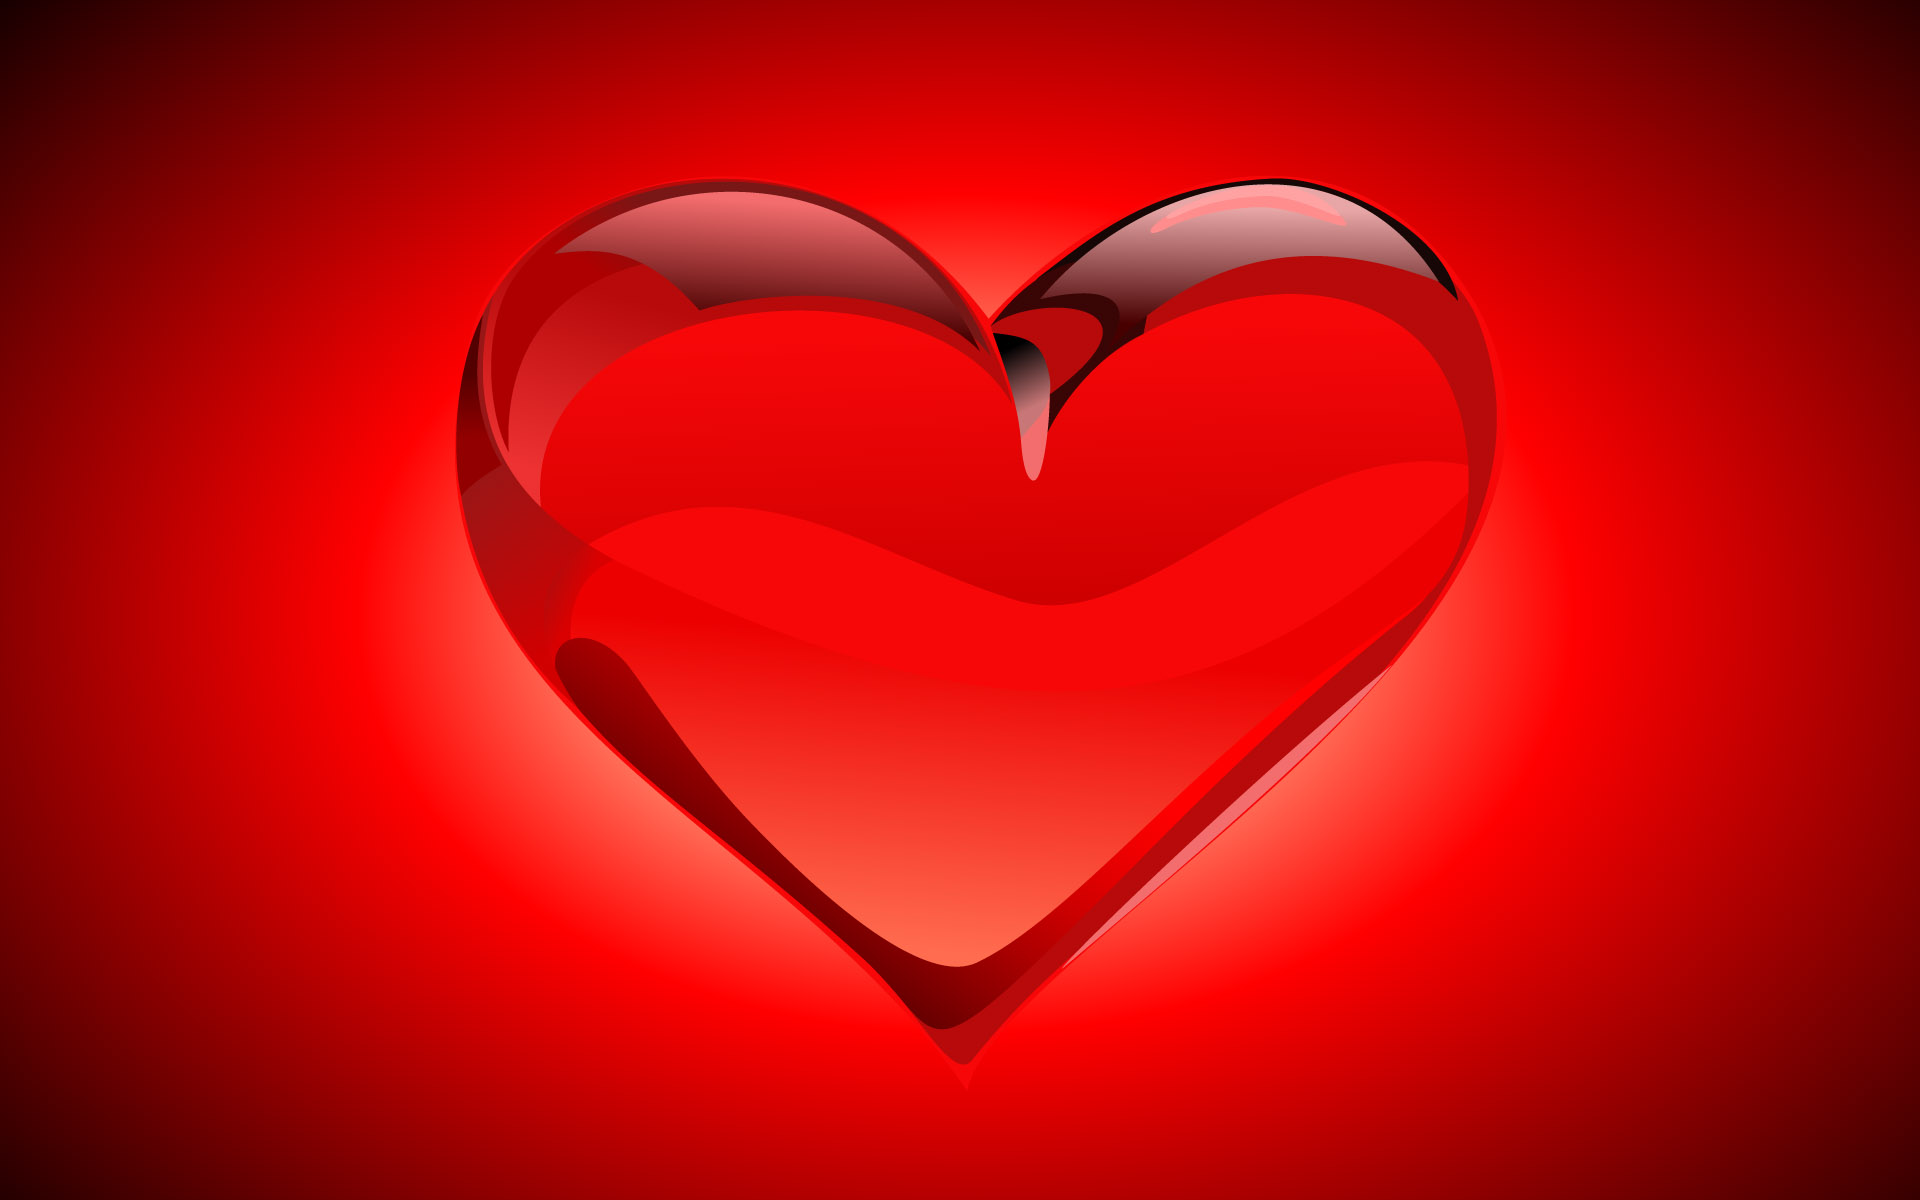 Red Heart Wallpaper 8755 Hd Wallpapers in Love   Imagescicom